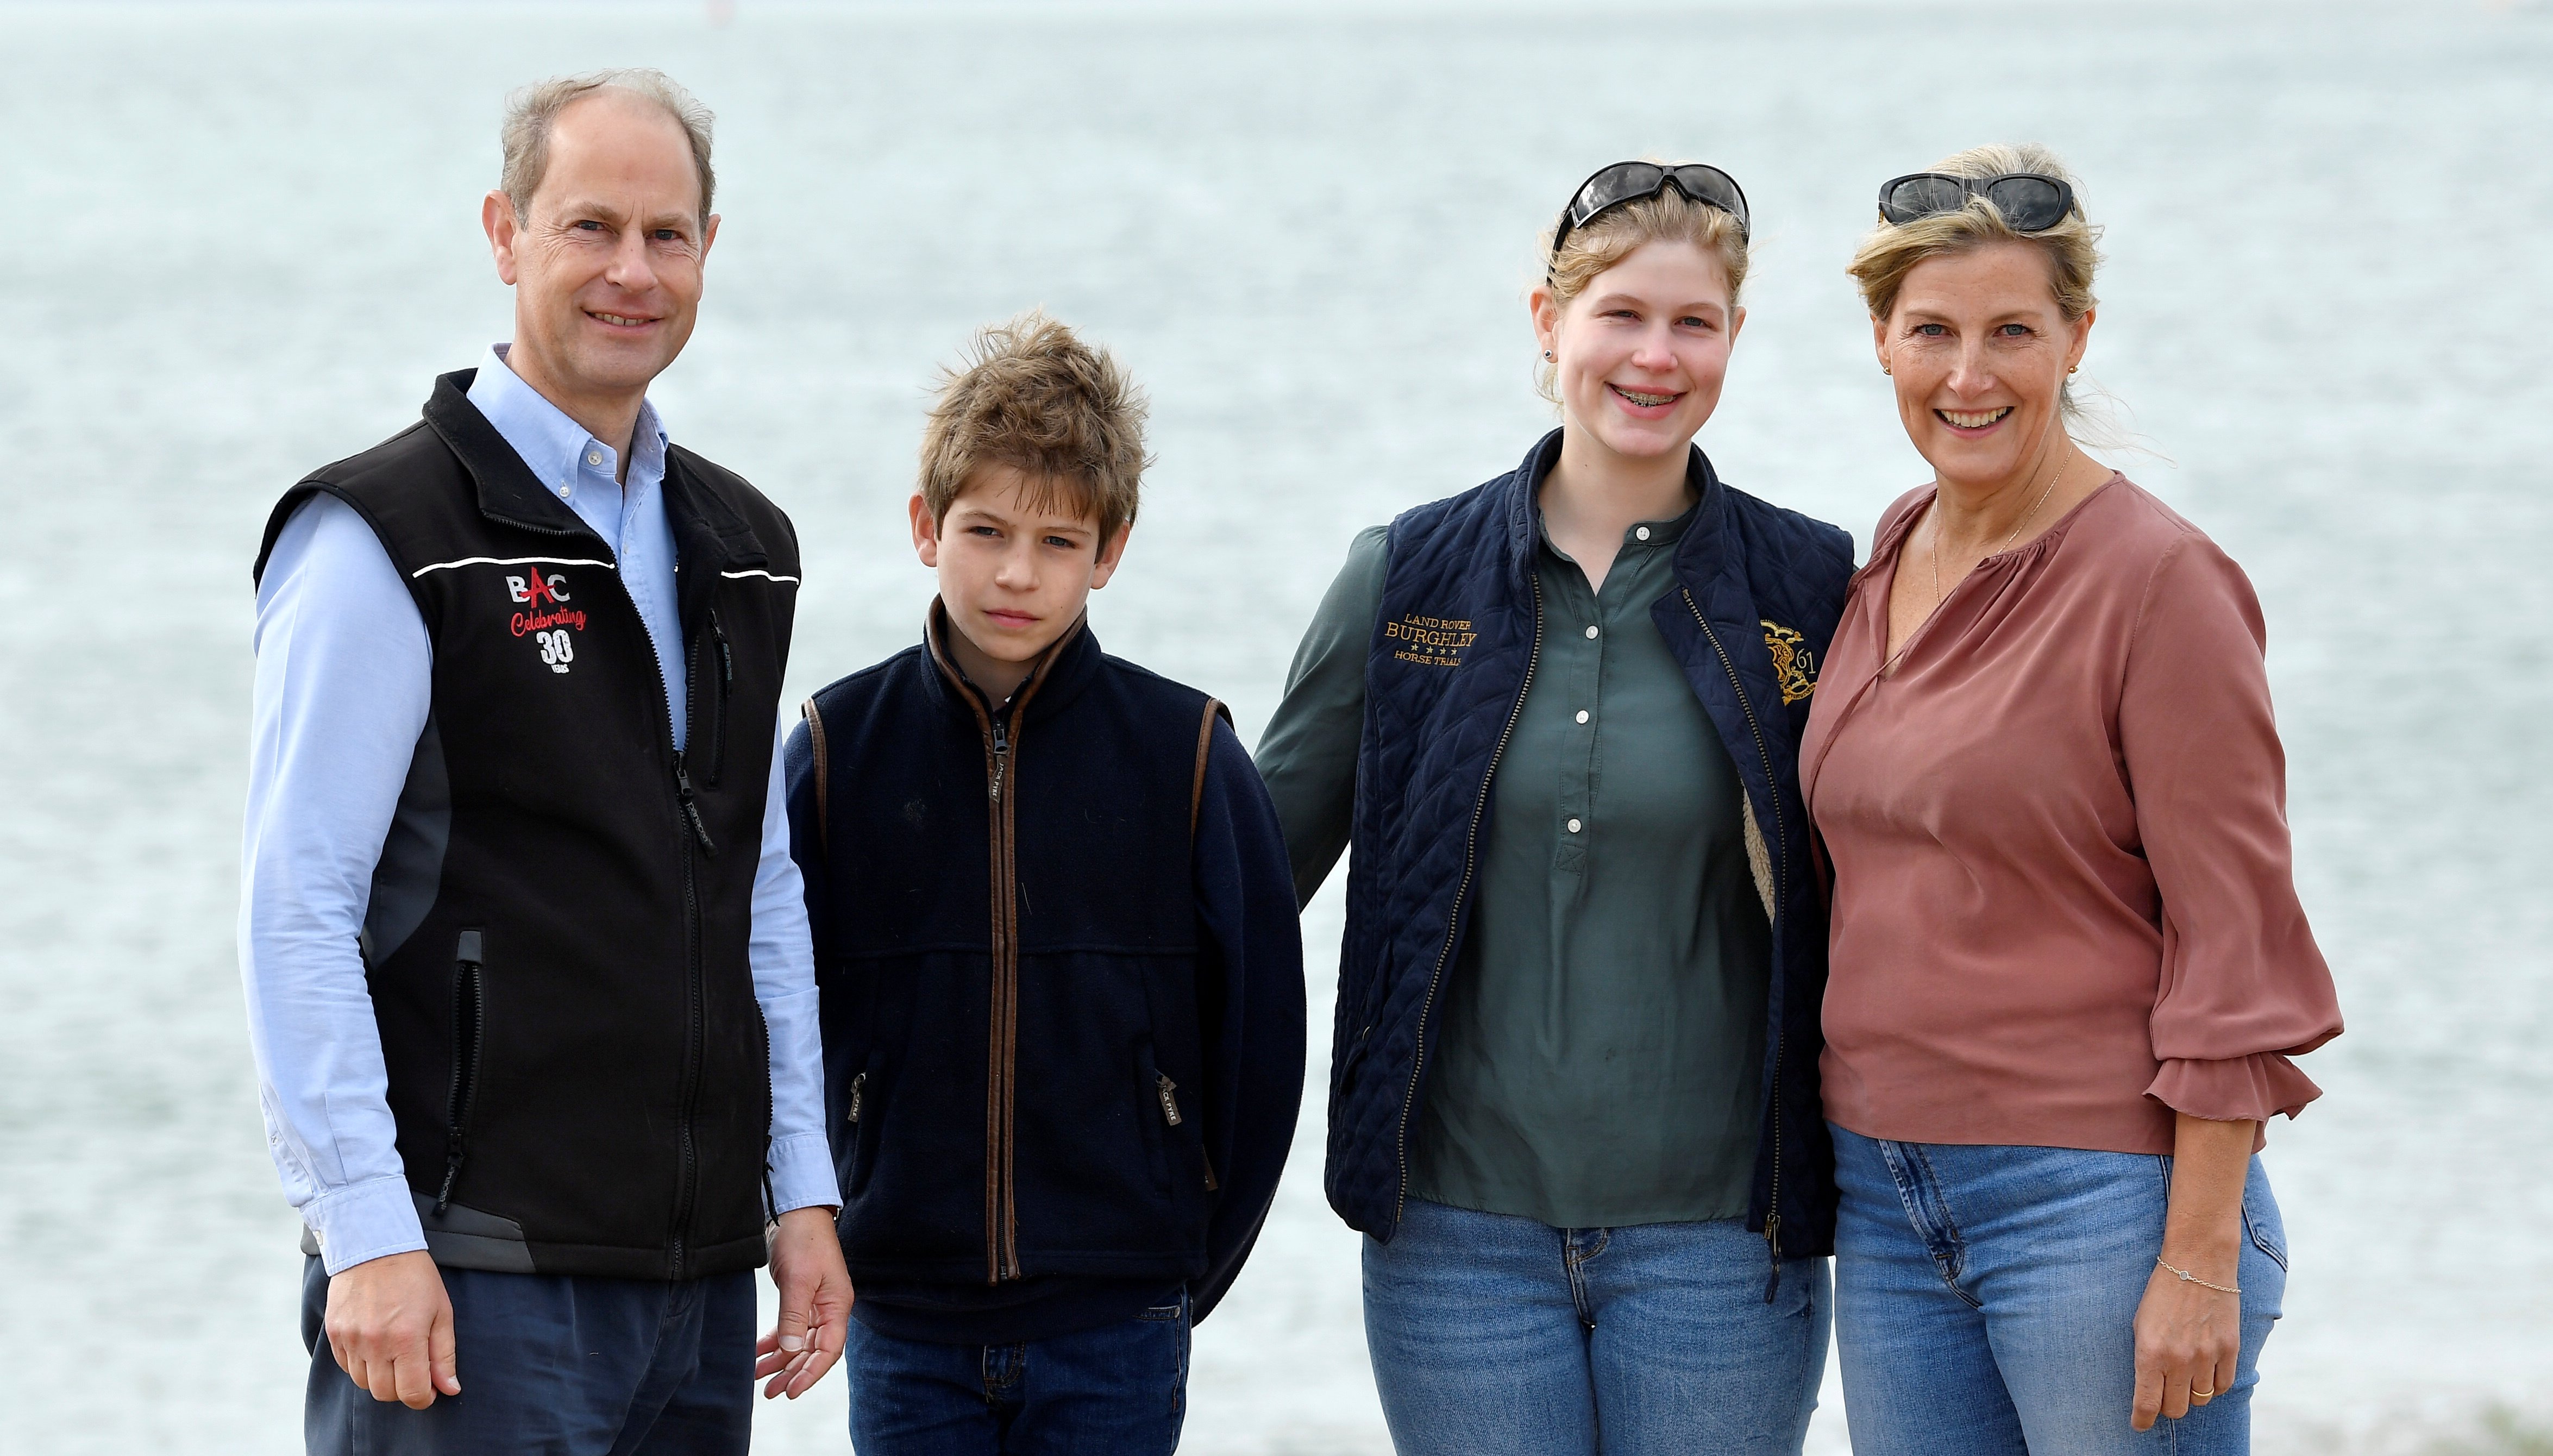 Prince Edward, Earl of Wessex and Sophie, Countess of Wessex posing with their children Lady Louise and James, Viscount Severn, at the Great British Beach Clean on September 20, 2020 in Southsea, United Kingdom ┃Source: Getty Images